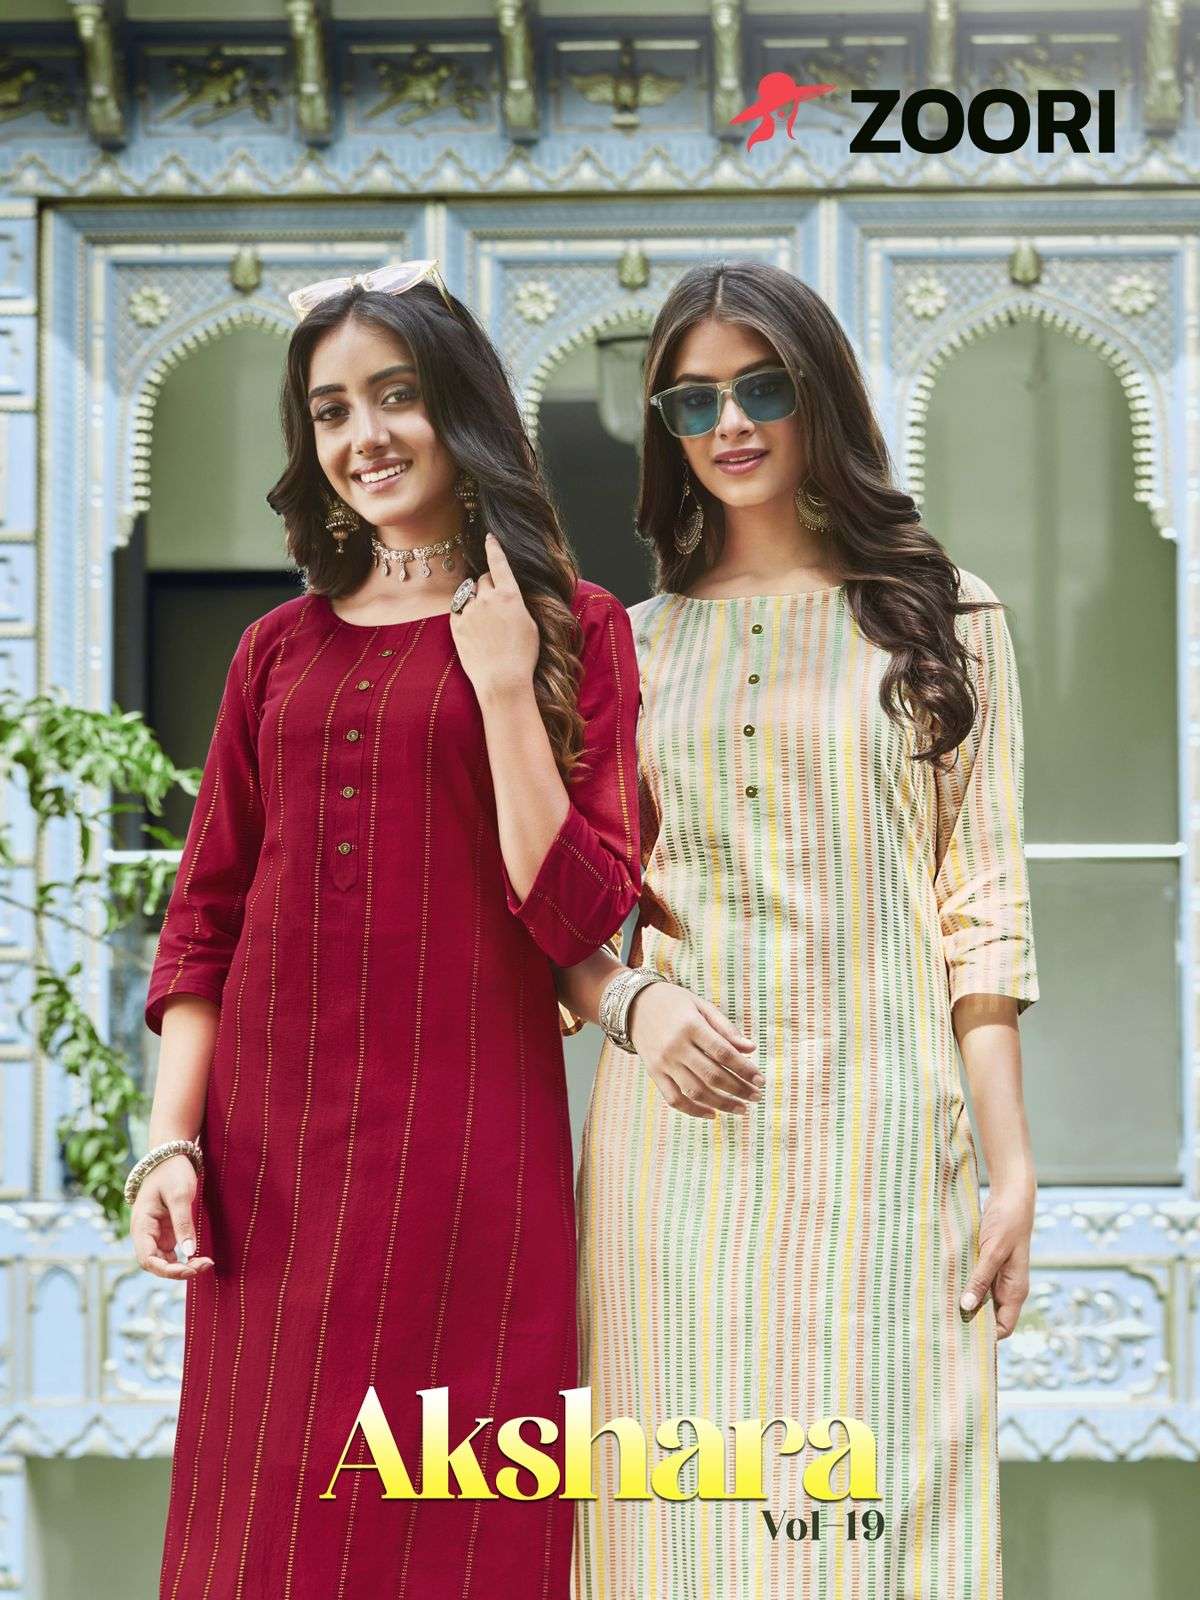 AKSHARA VOL 19 BY ZOORI BRAND - RAYON PRINTED CASUAL KURTI WITH 3-4TH SLEEVES - WHOLESALER AND DEALE...